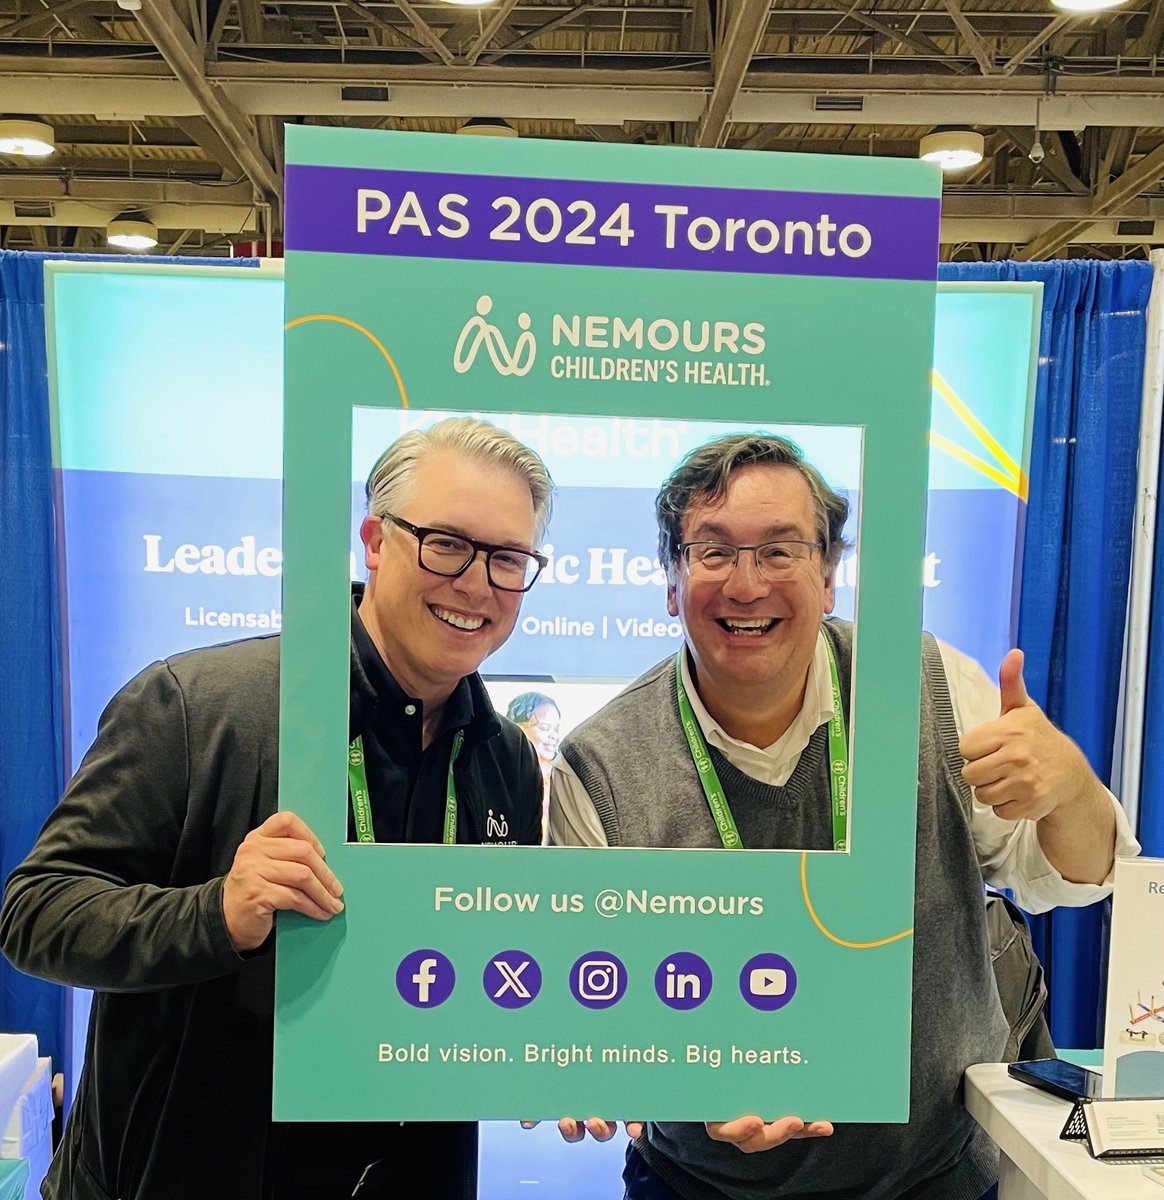 Yes it’s true…@Nemours has two booths at #PAS2024 #PASMeeting! Stop by & say hi 👋 to Jeff at Nemours #KidsHealth booth #829. Learn more about our white label pediatric instructions, videos & online content. #WellBeyondMedicine